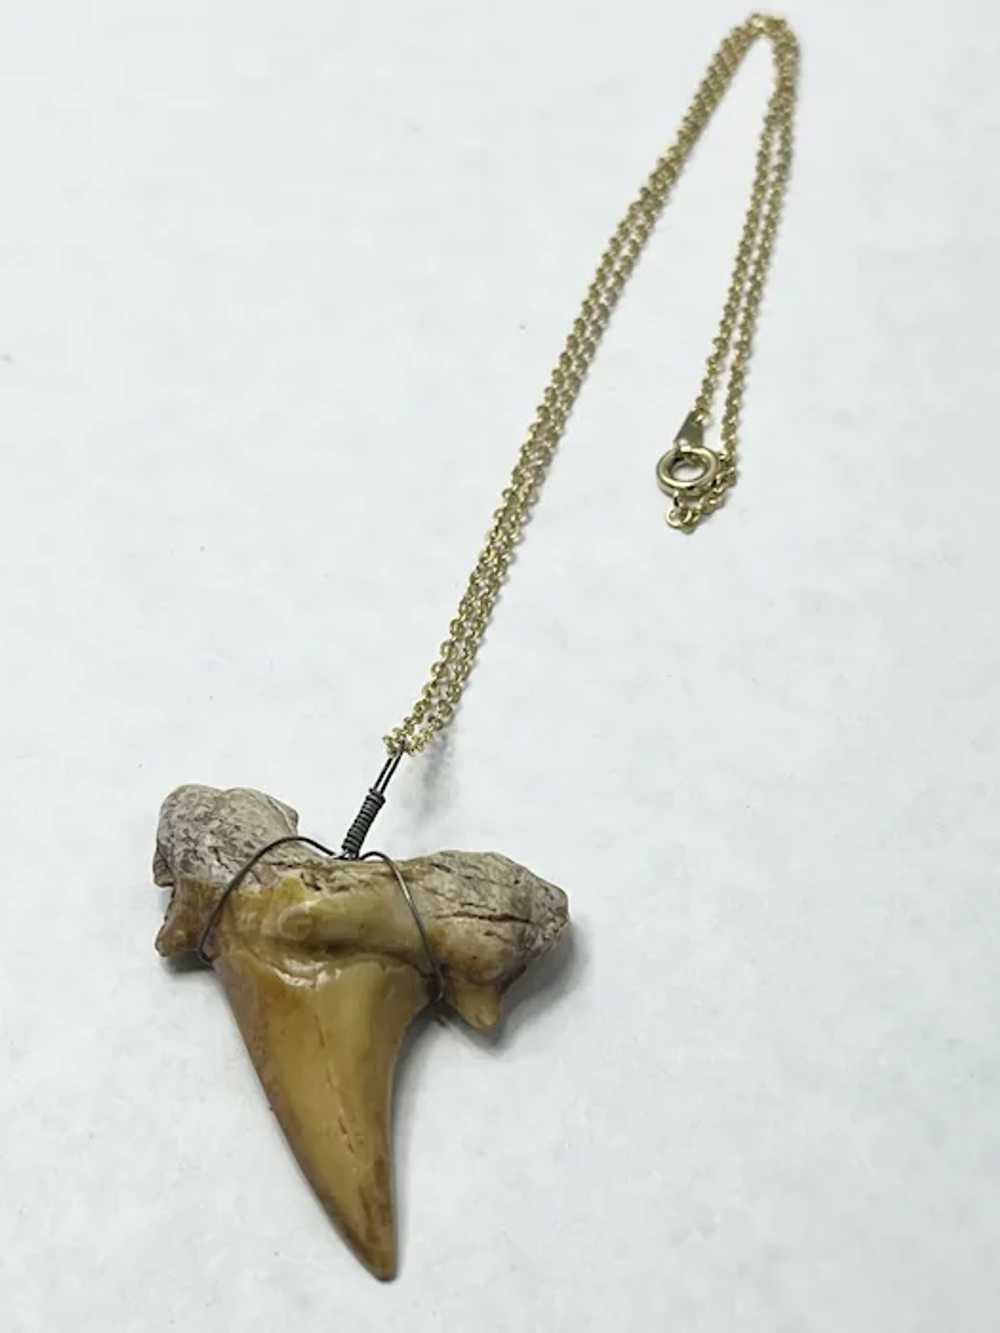 Vintage Shark Tooth Pendant Necklace - image 3